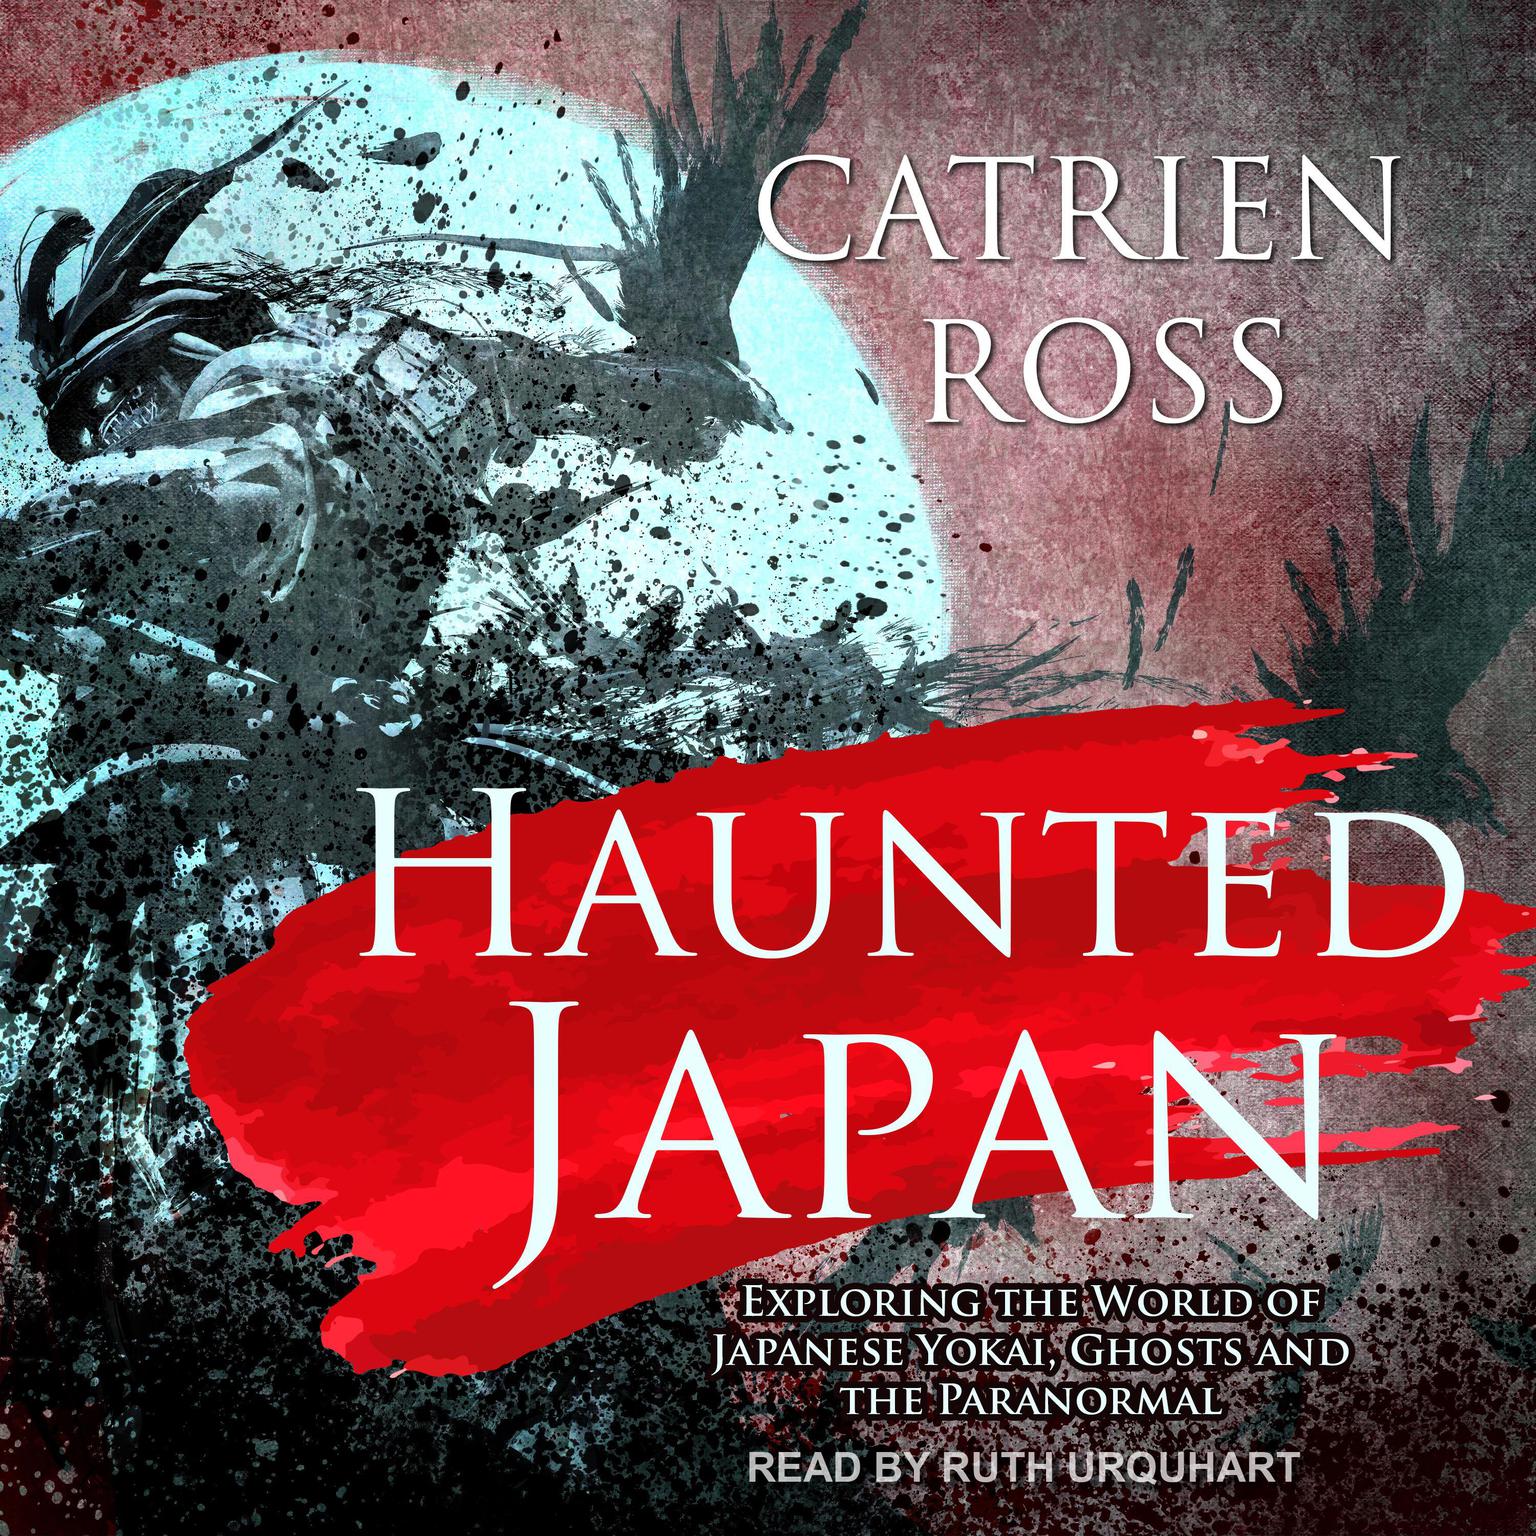 Haunted Japan: Exploring the World of Japanese Yokai, Ghosts and the Paranormal Audiobook, by Catrien Ross